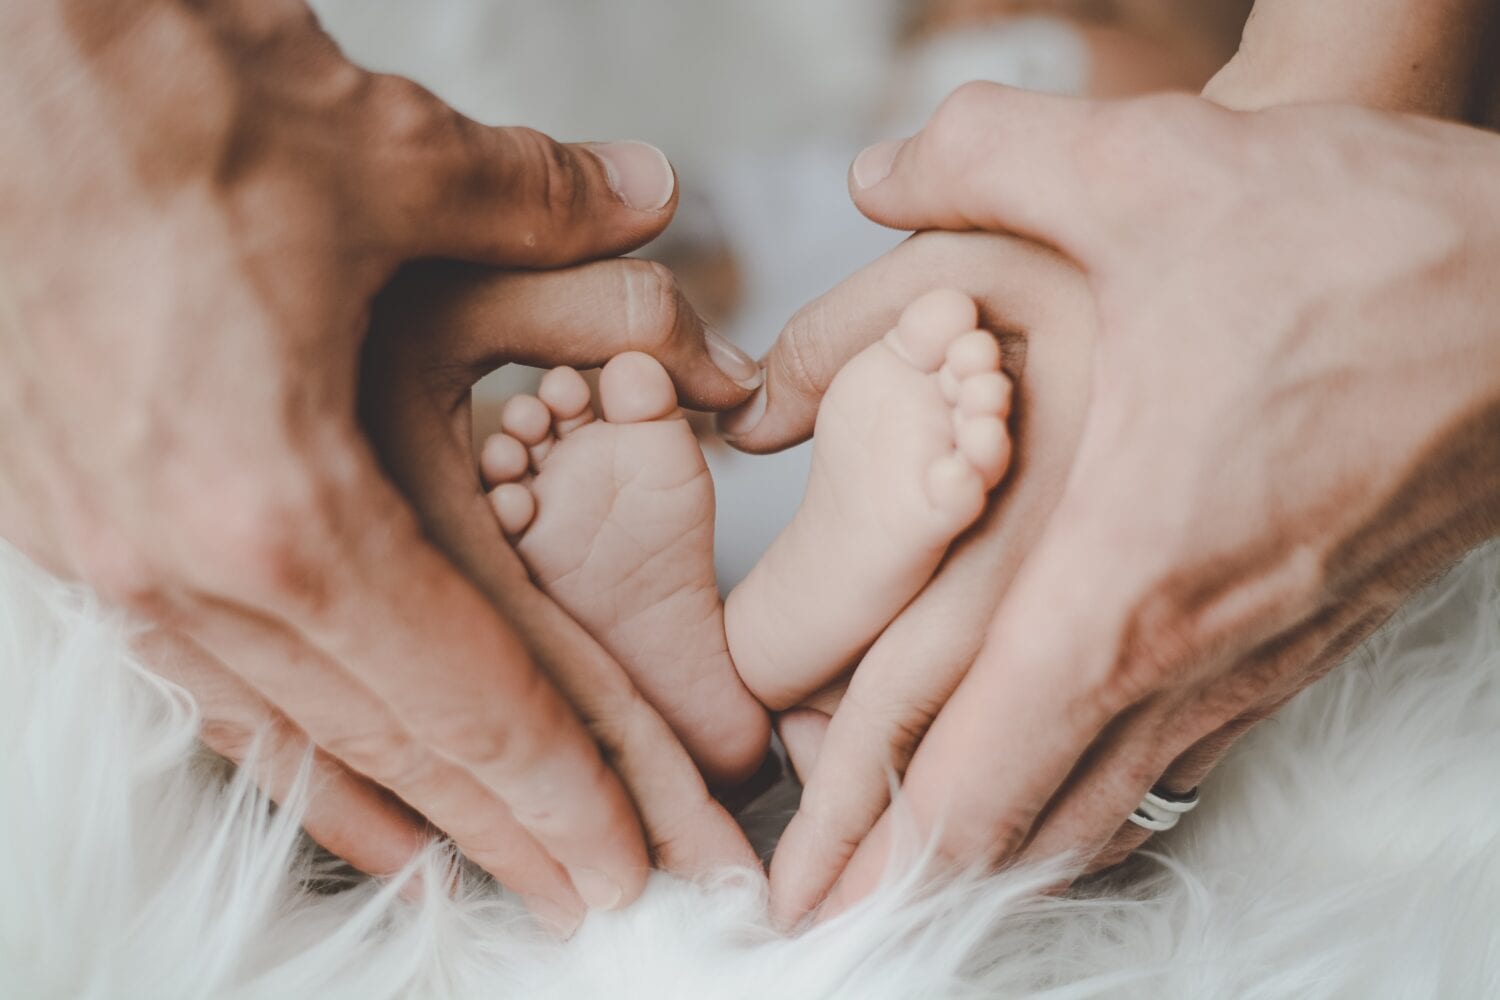 Although those little feet may not be navigating your home right away, it is never too soon to Baby-Proof your floors.